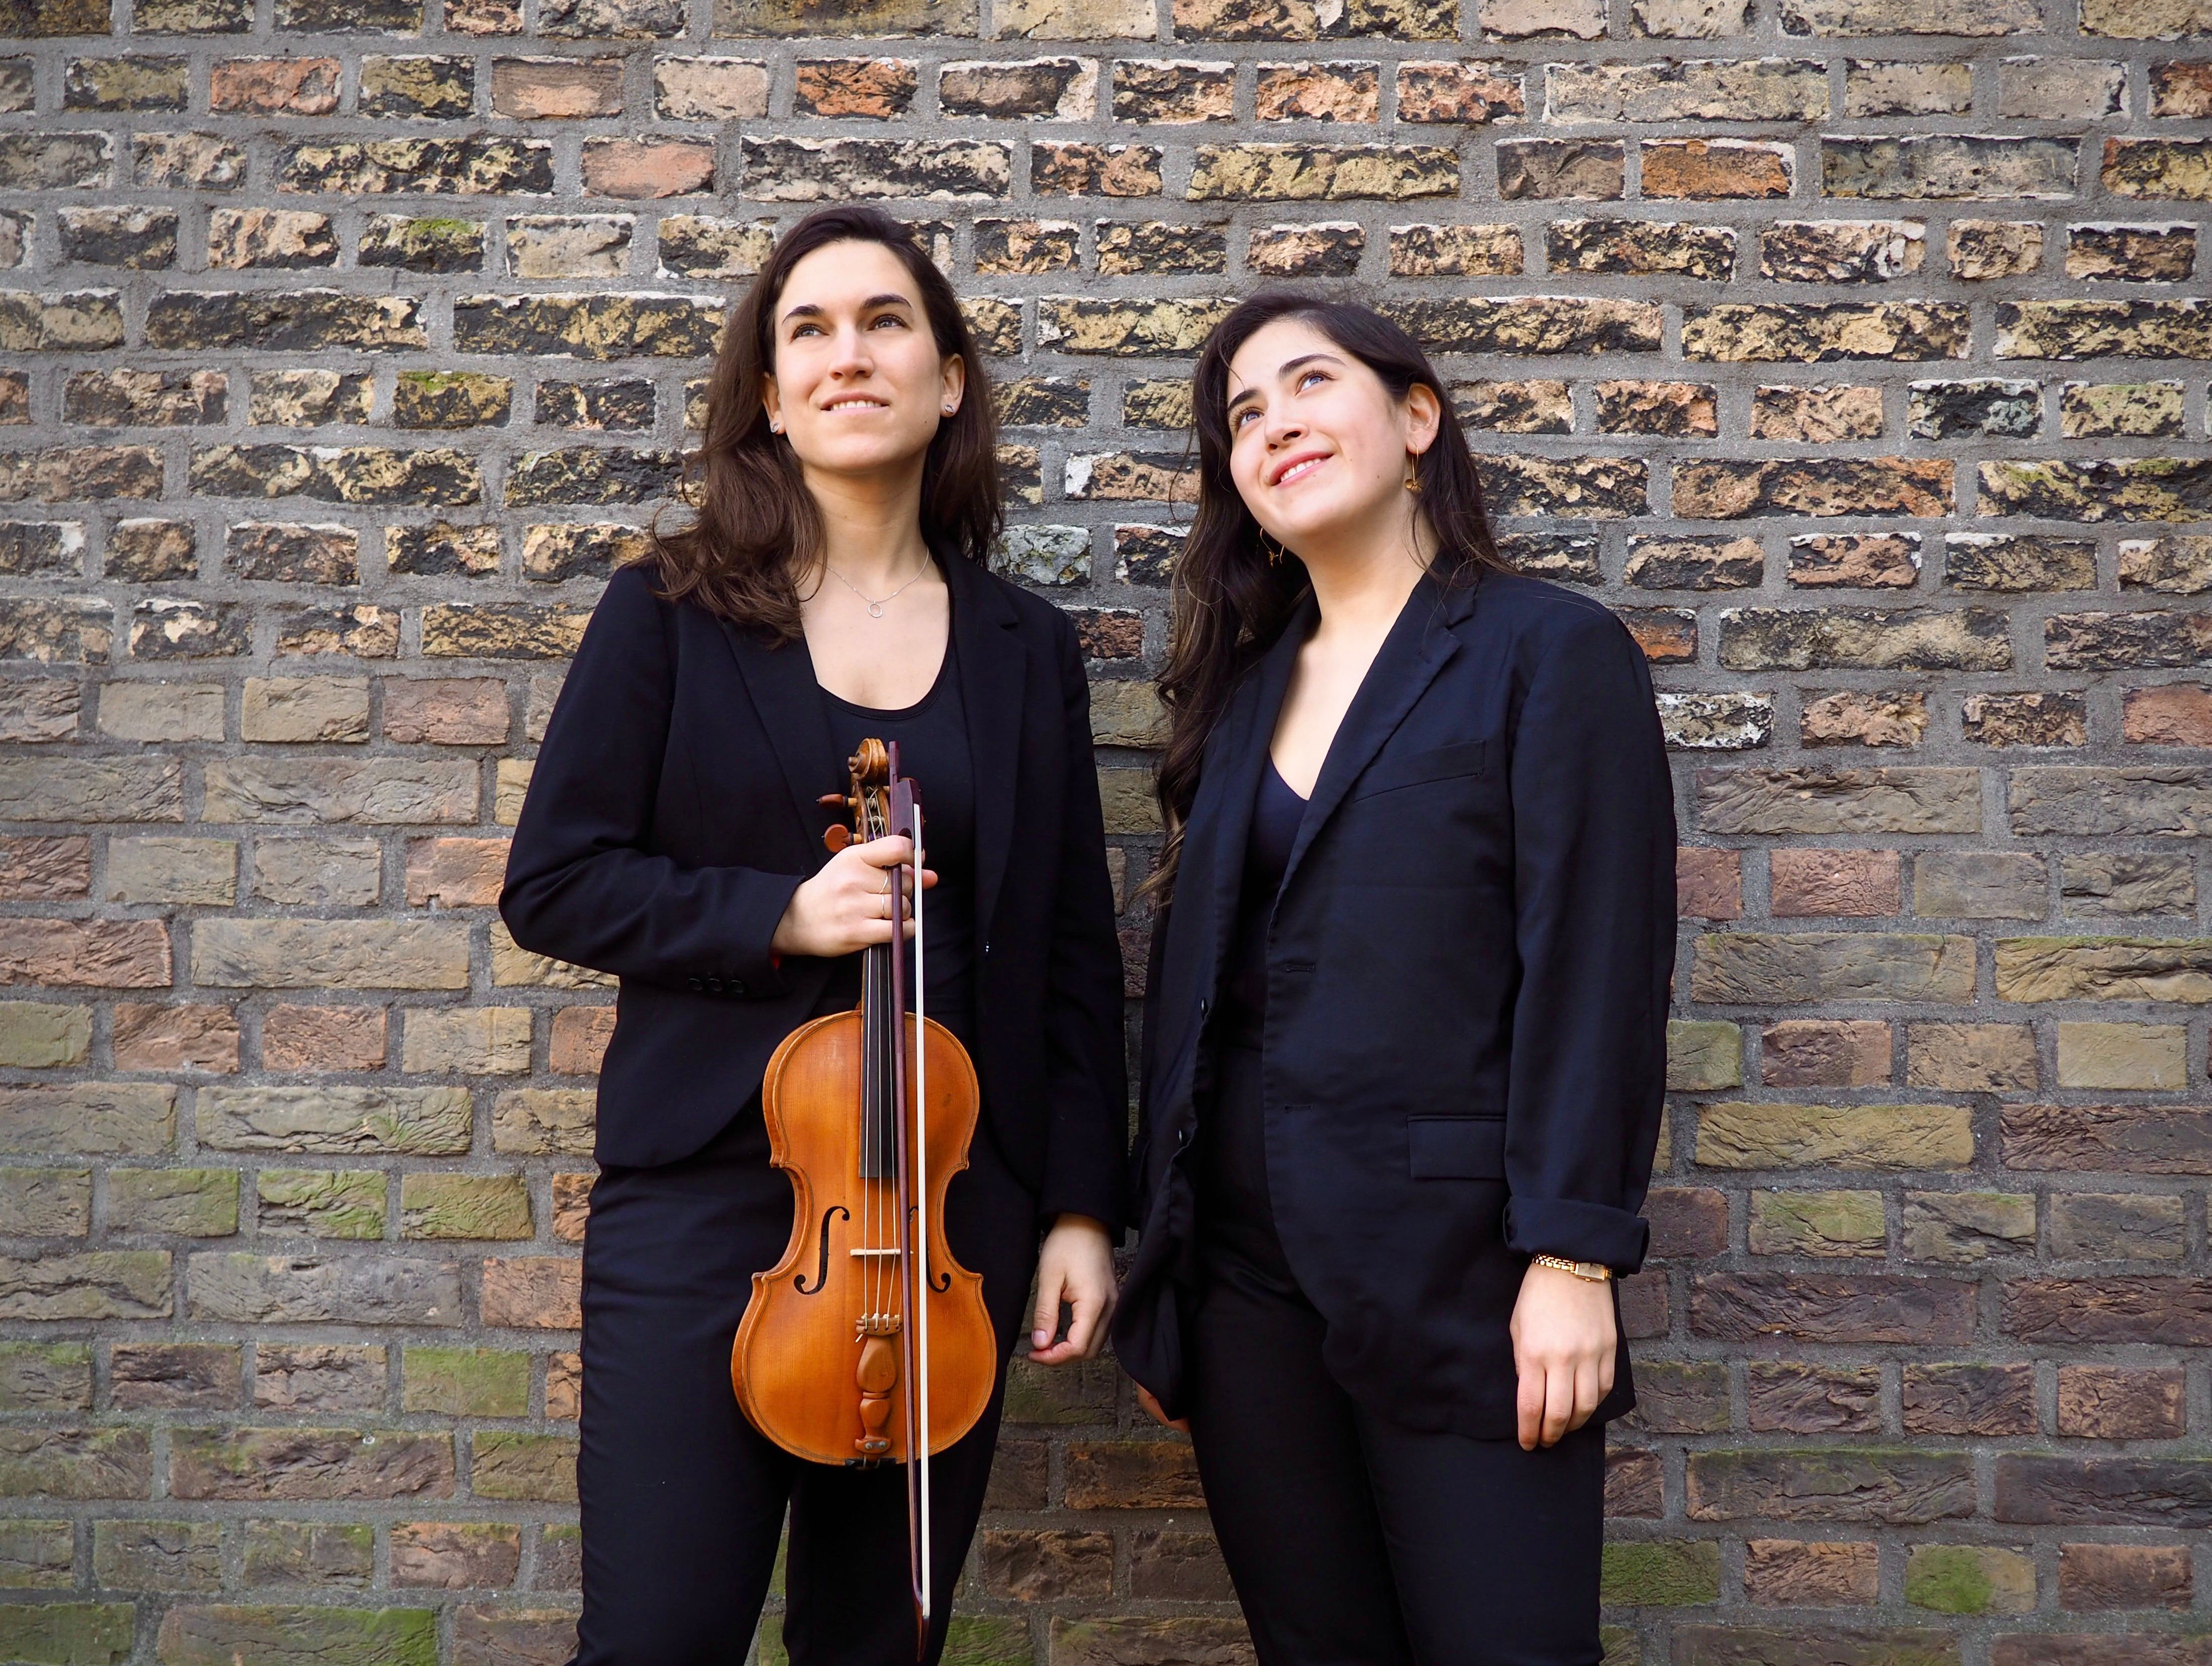 Ai Horton and Elana Cooper with her violin looking up in front of a brick wall.